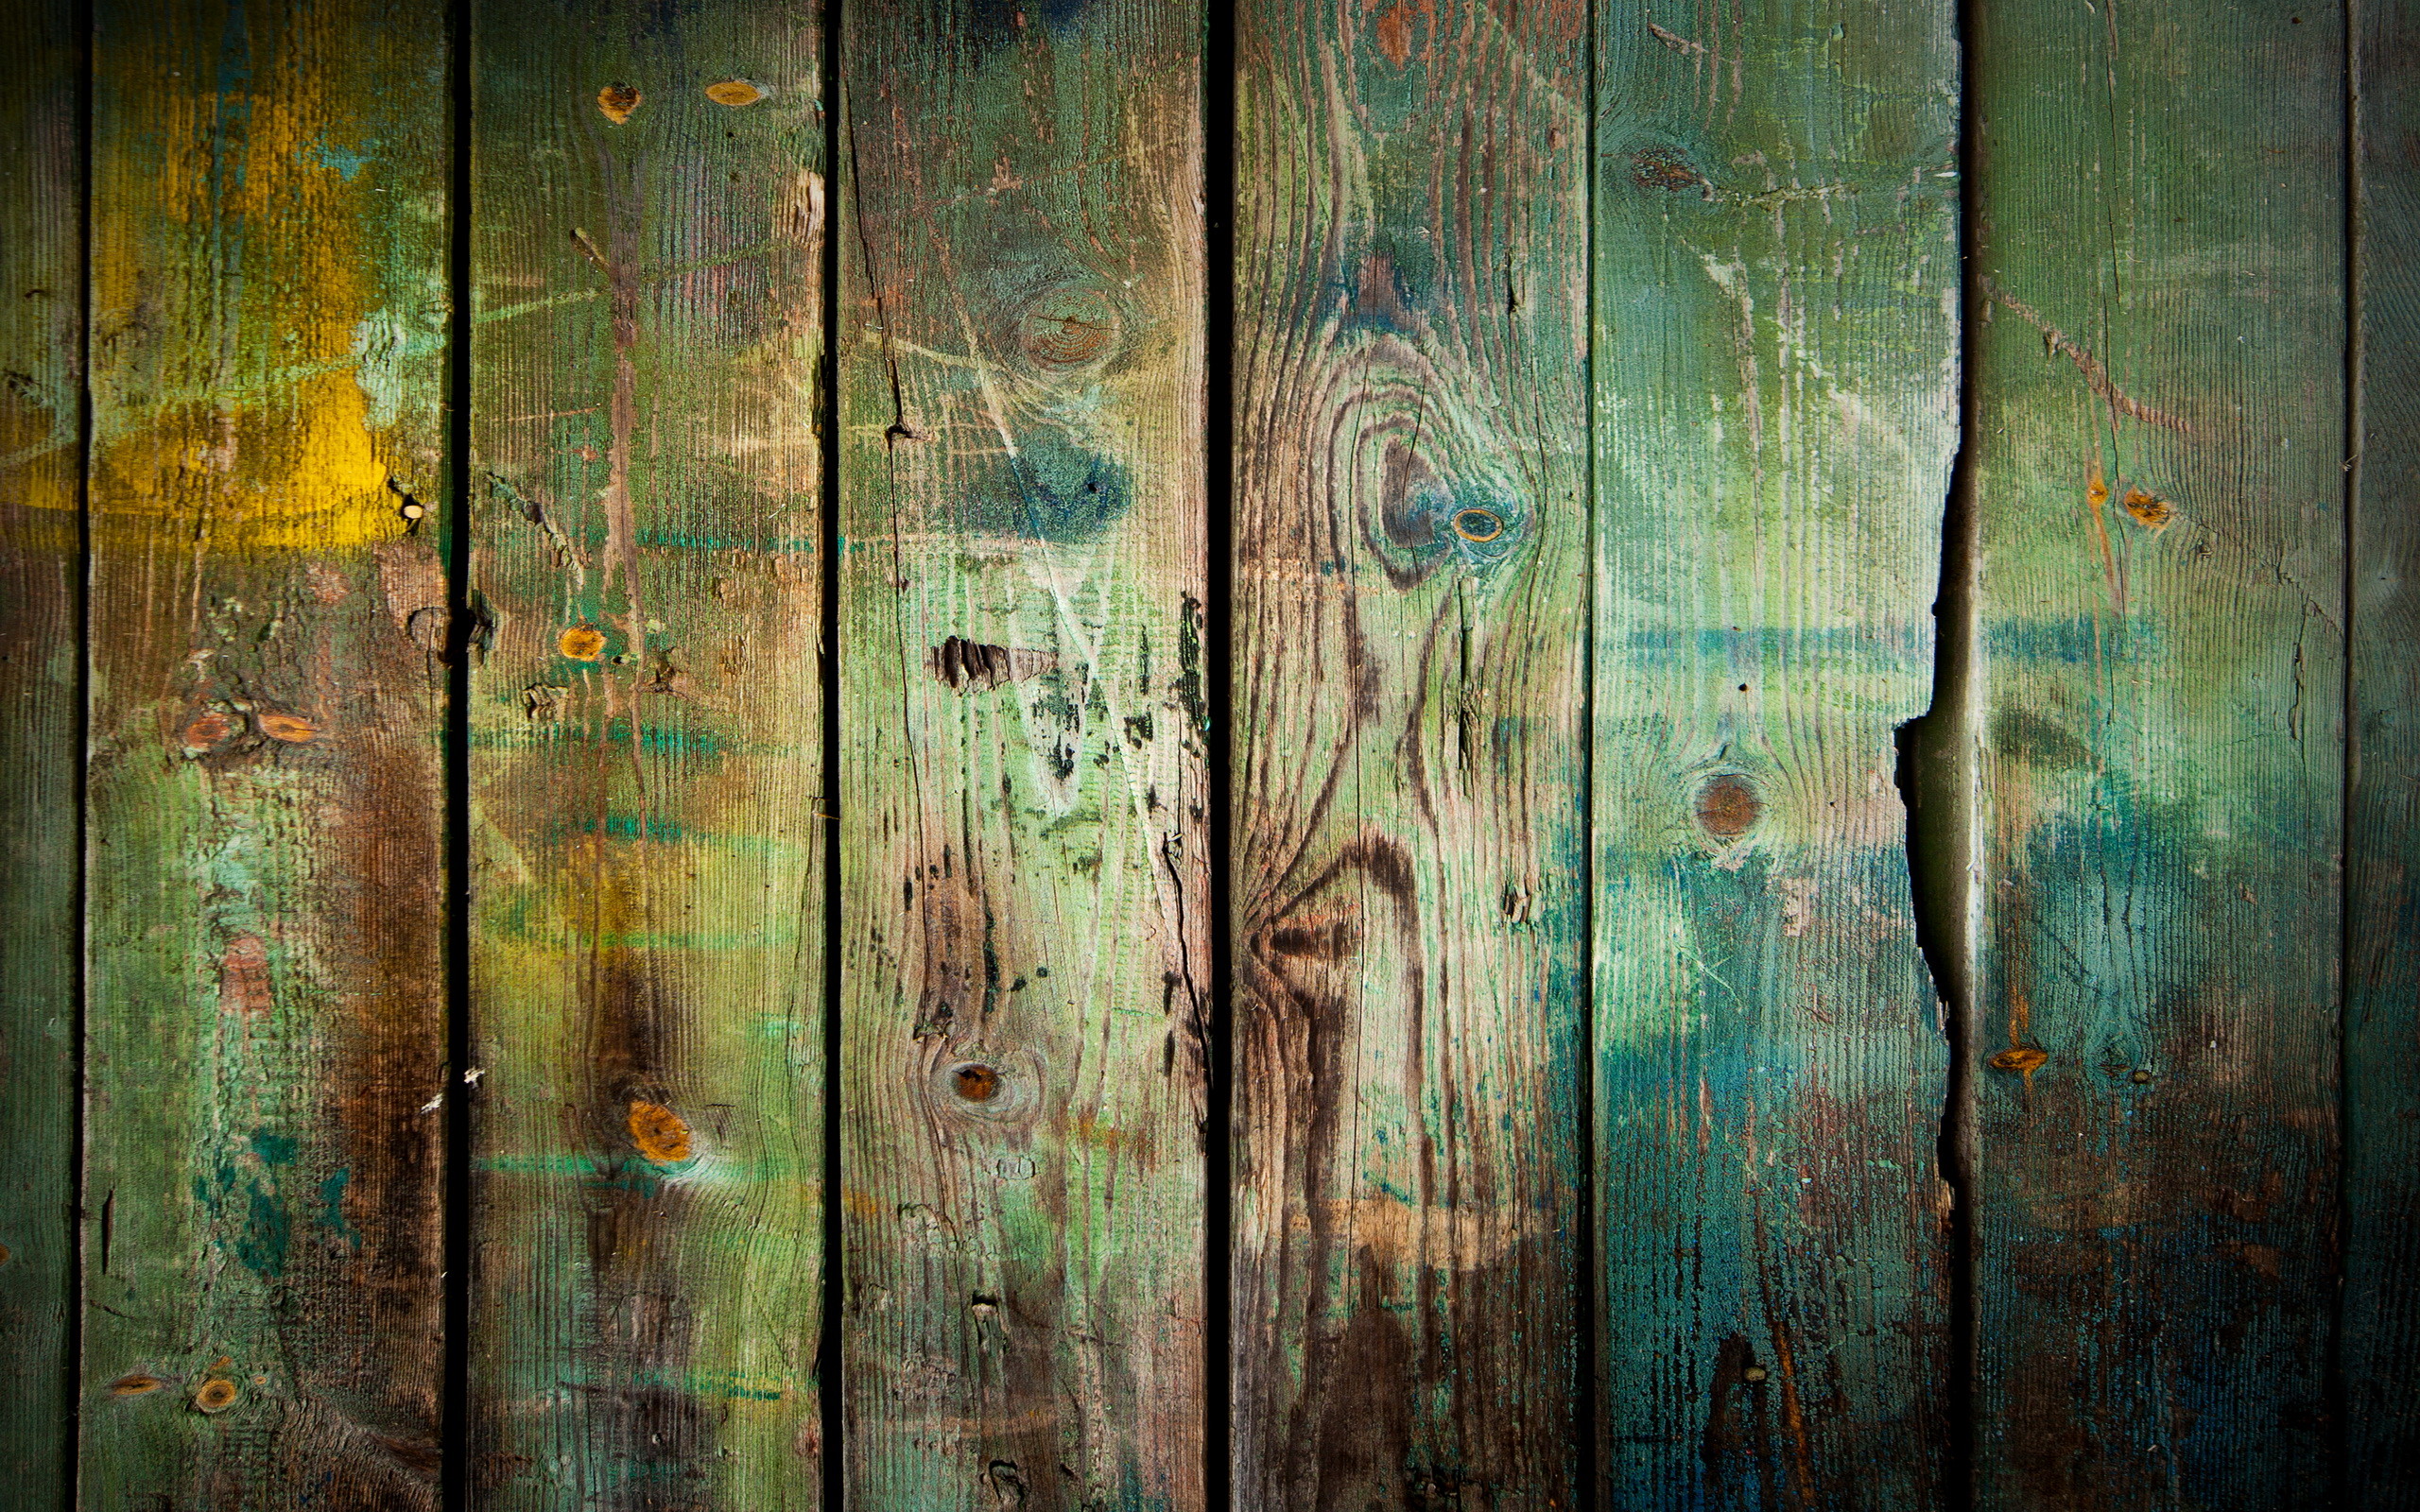 holz wallpaper,green,wood,turquoise,text,teal